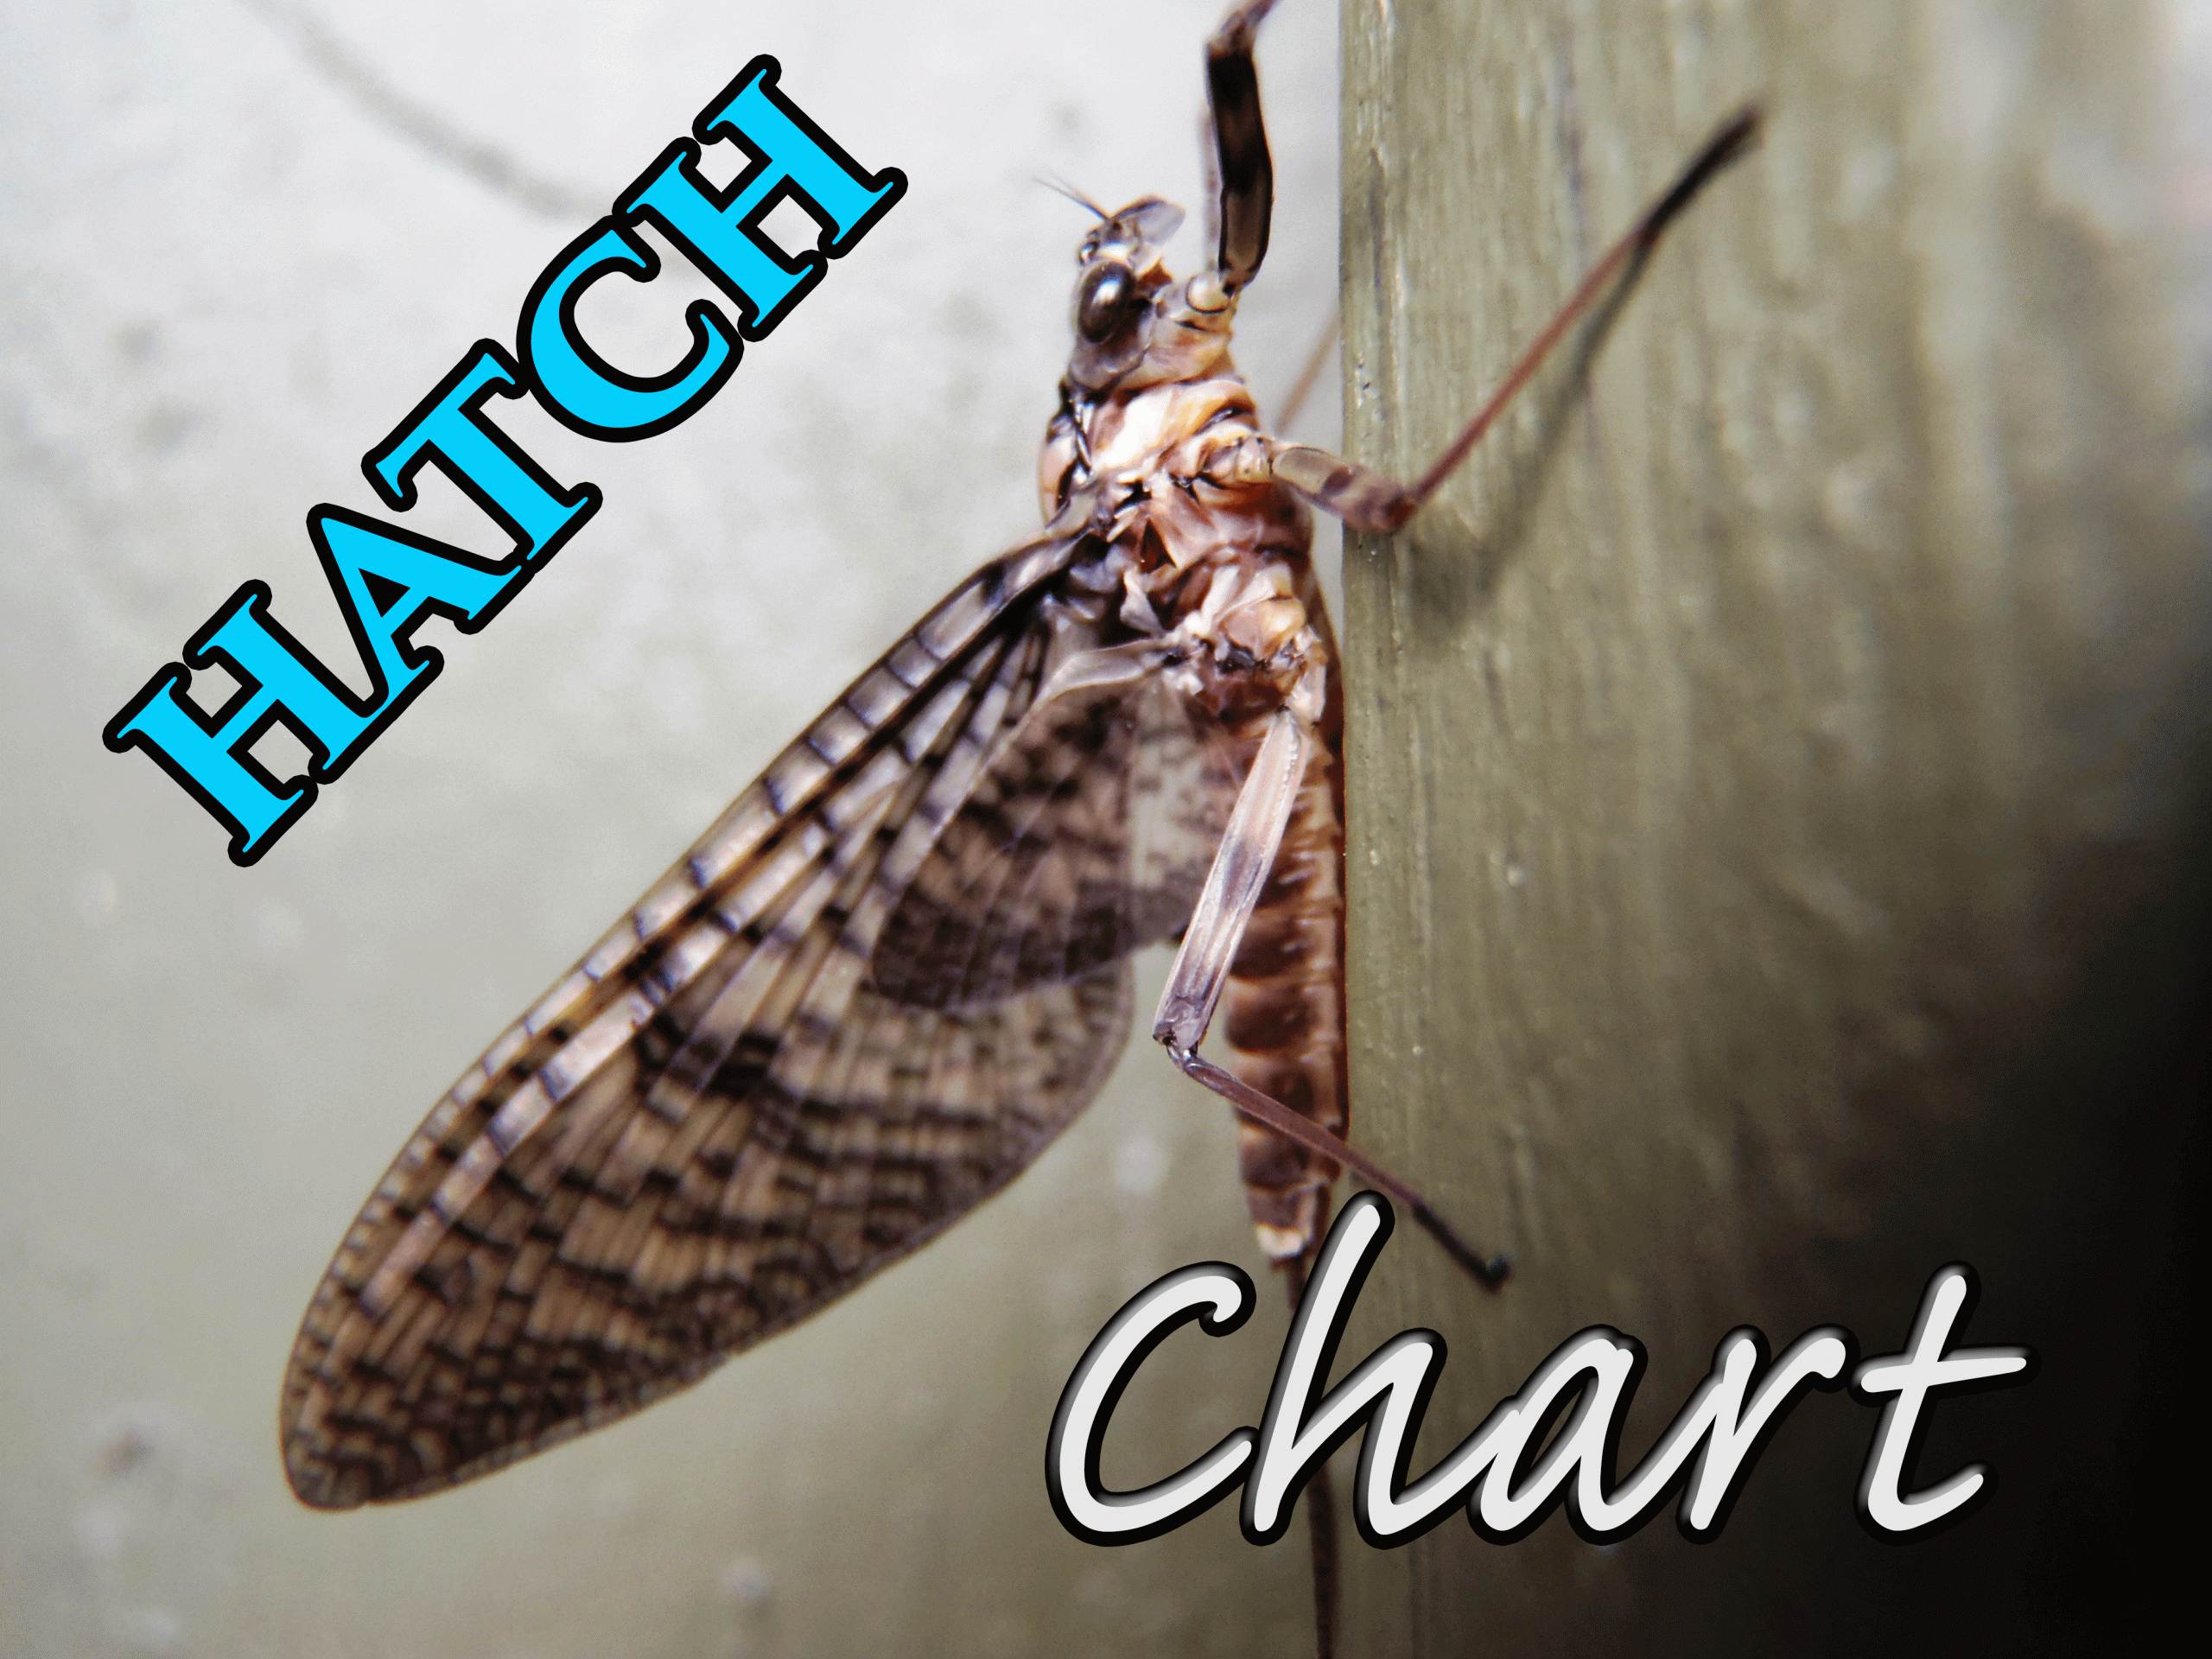 Pennsylvania Hatch Chart. Find Out When The Best Hatches Are Coming Off. Find Out The Water Levels For Penns, Sring, Lehigh River, Tulpehocken, Pine And Many More.